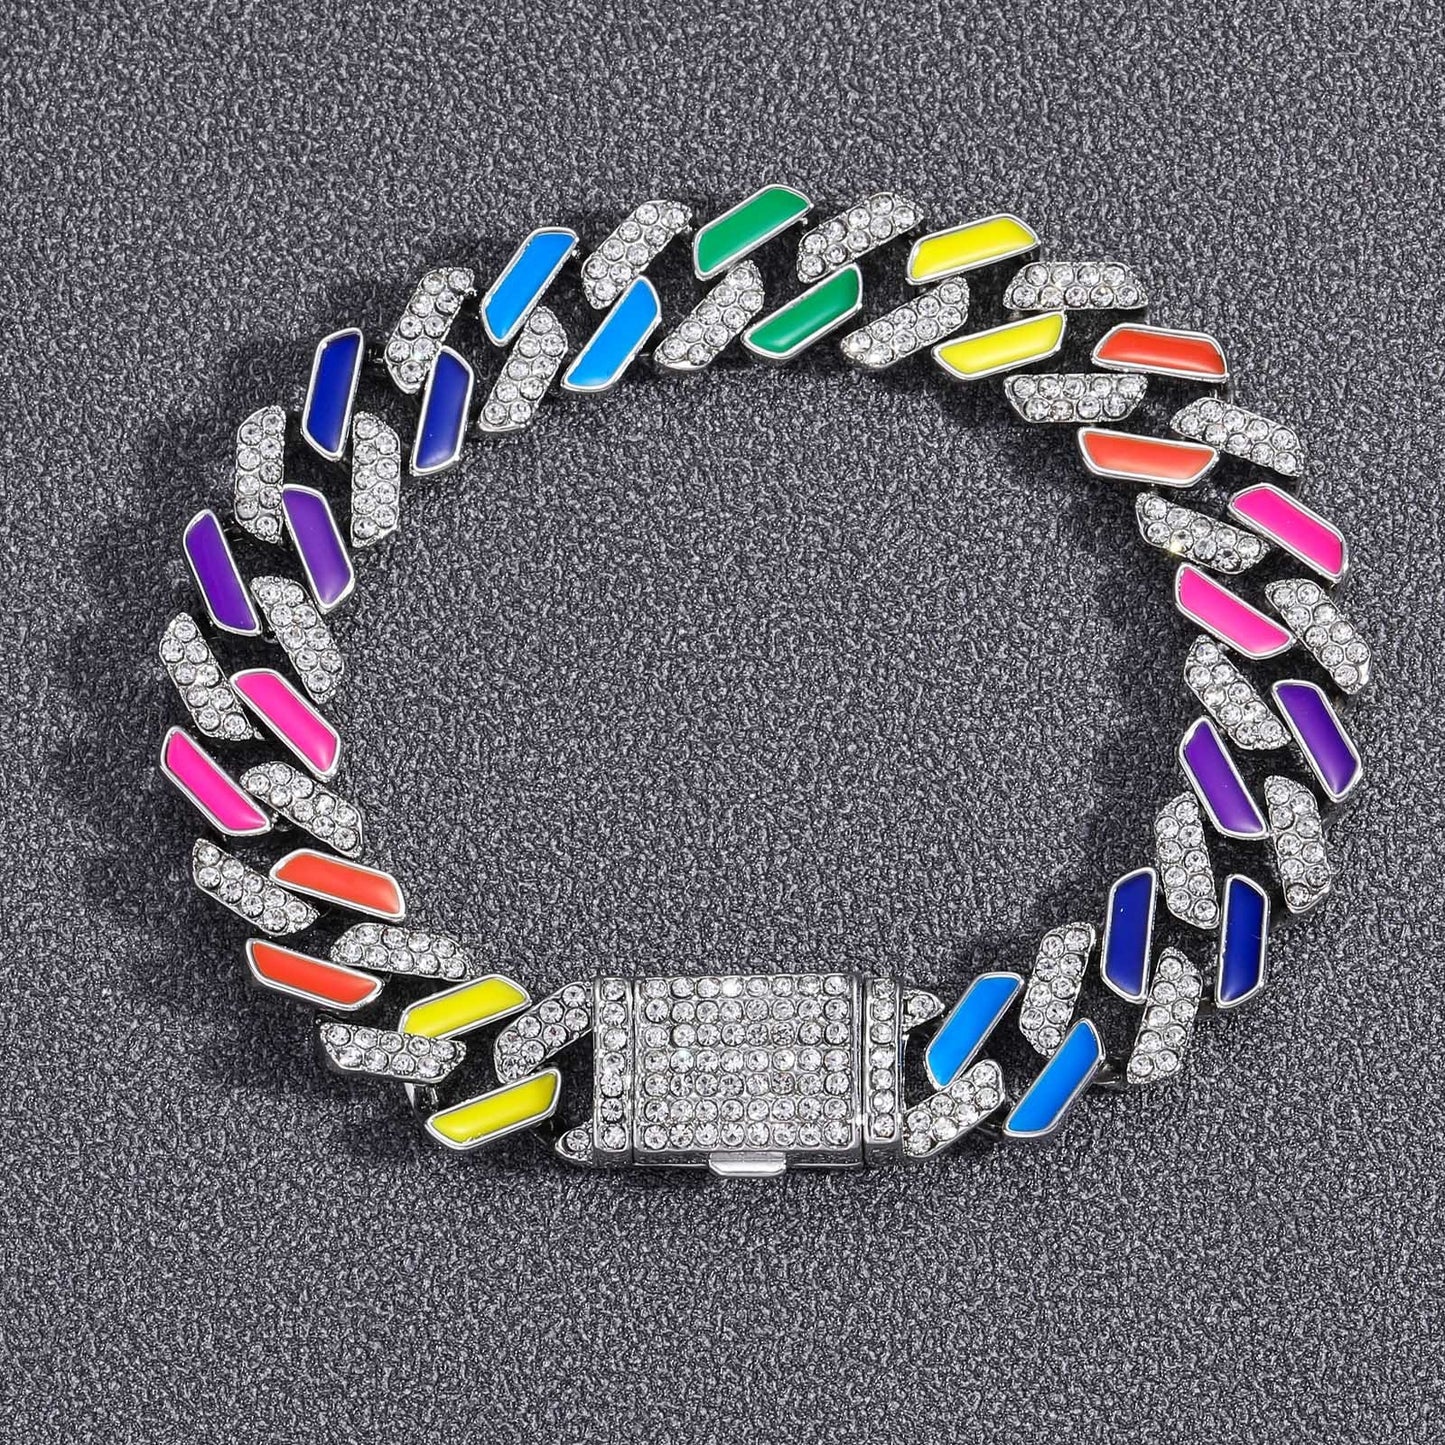 Hip Hop12mm Ice Crystal Rhinestone Colorful Cuban Chain Color Nightclub Tide Brand Rapper Personality Male Bracelet Necklace